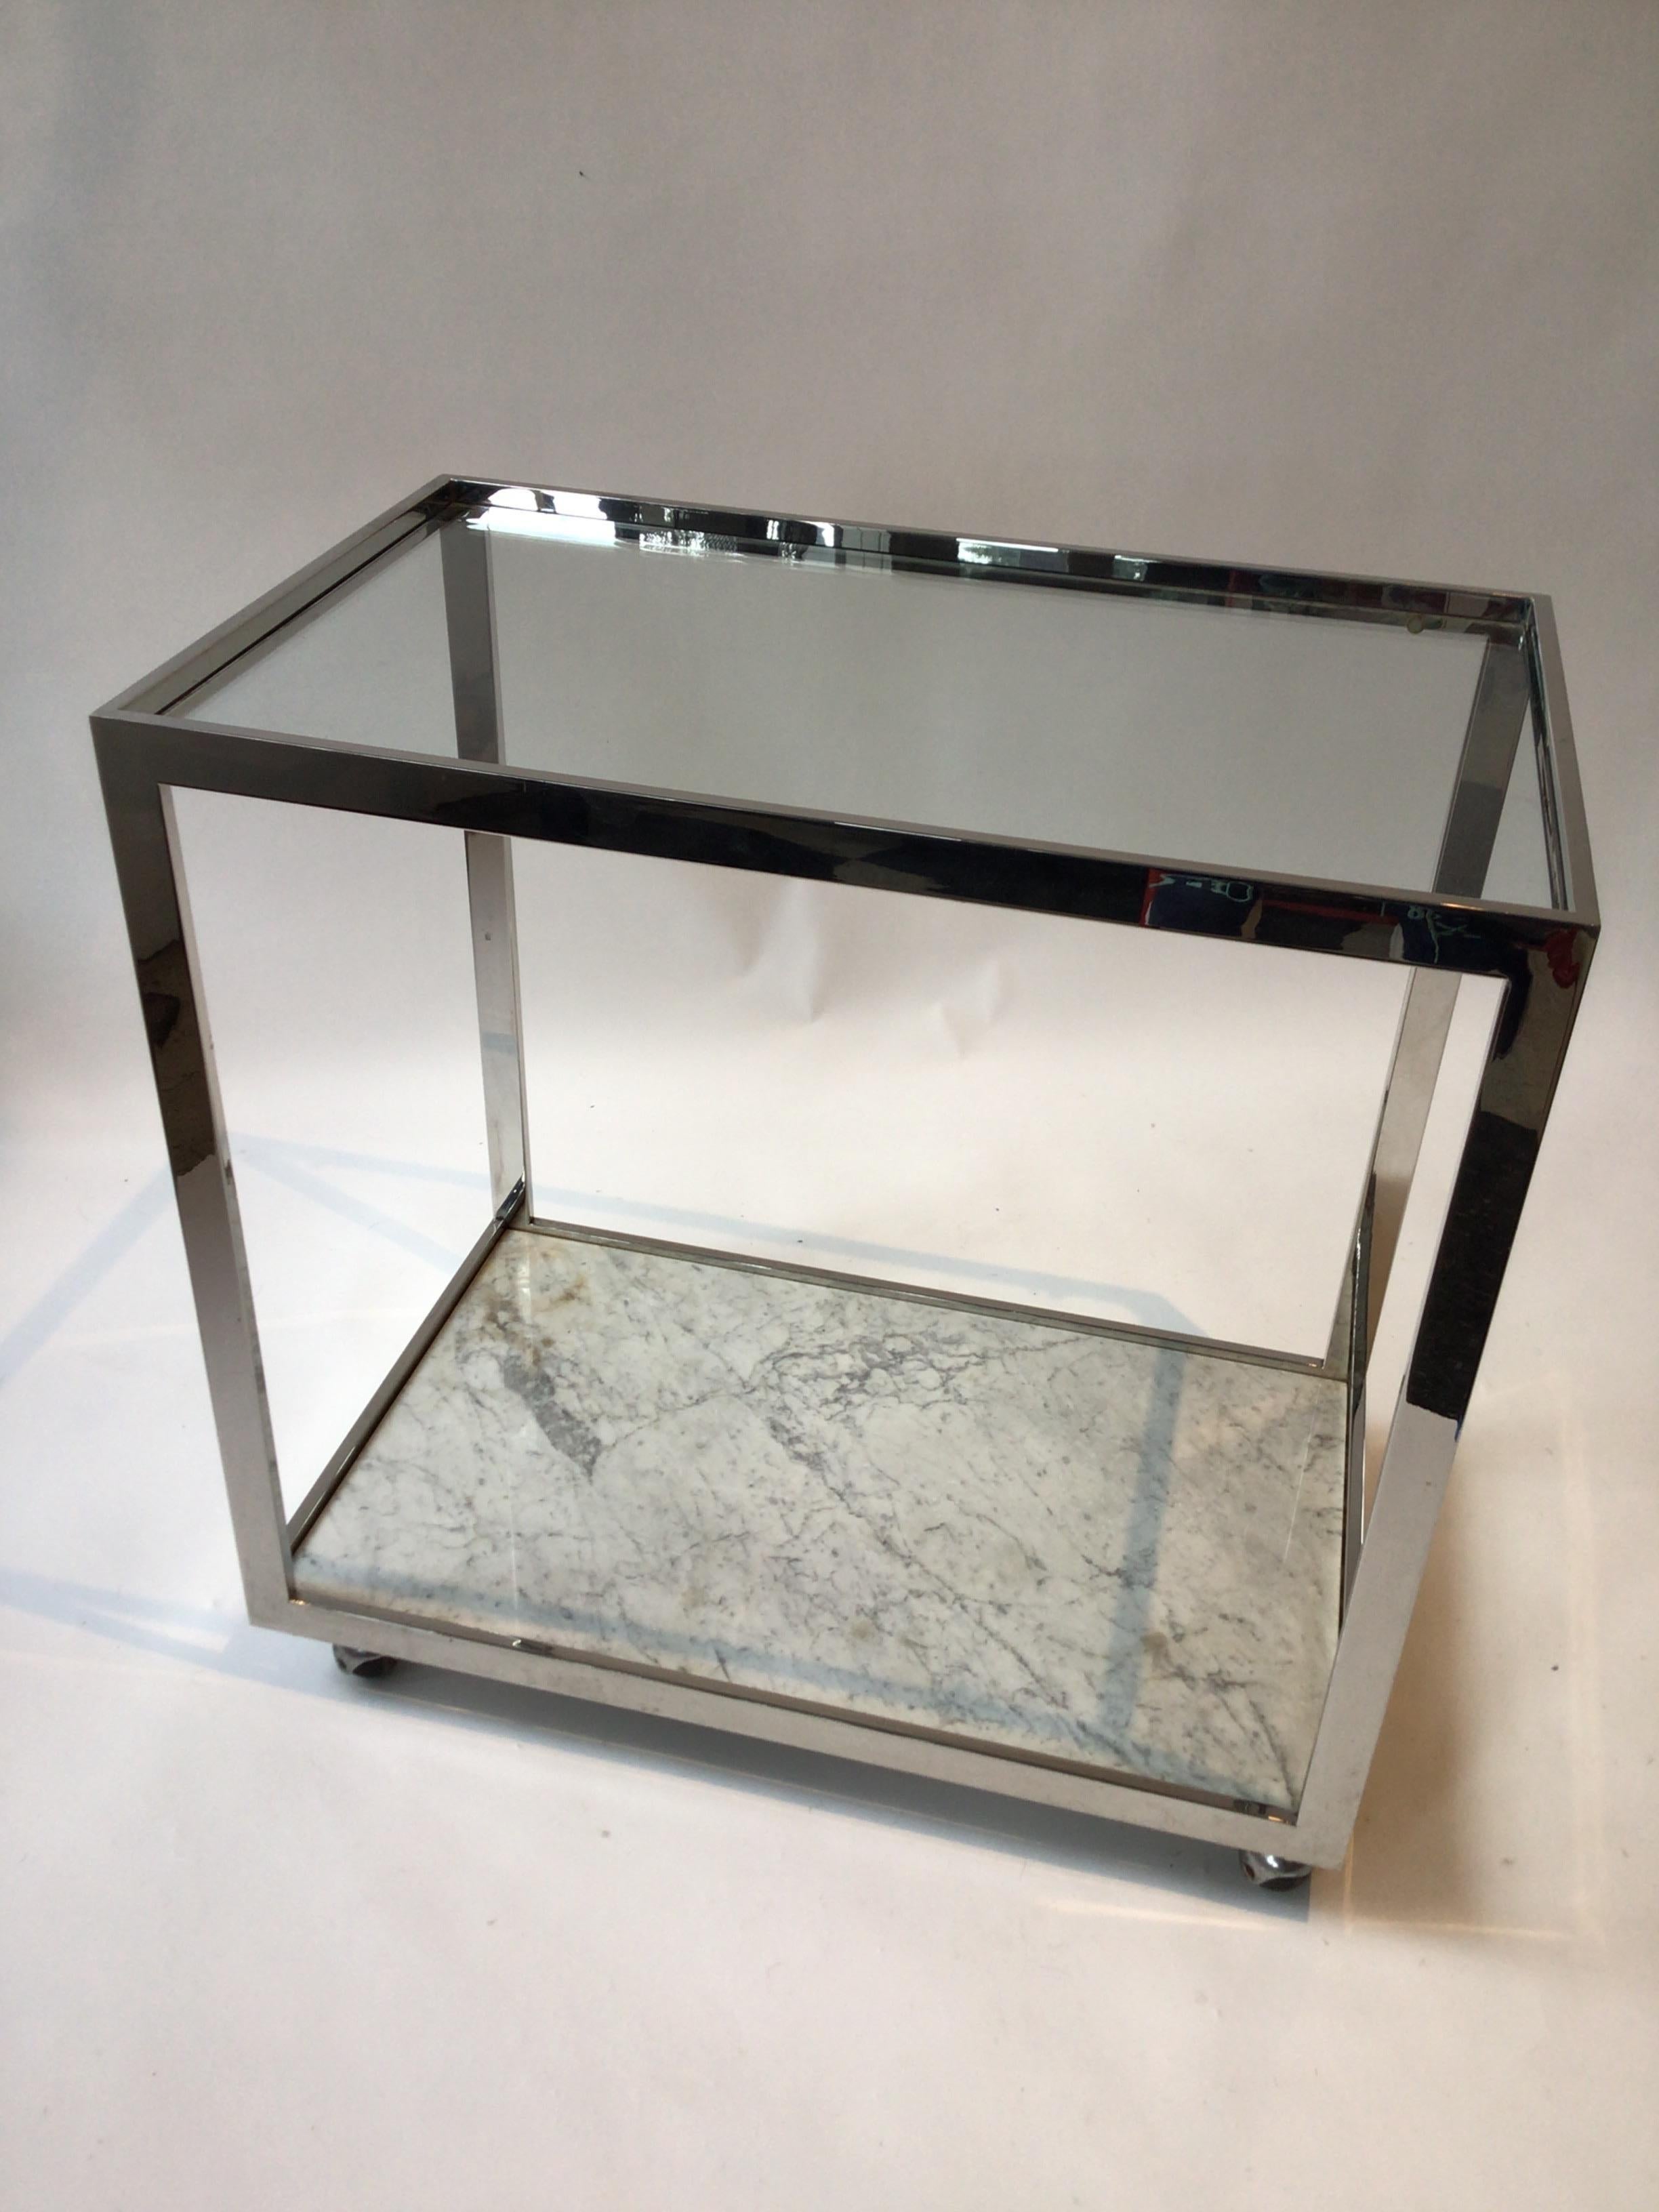 1970s Milo Baughman chrome glass and marble bar cart. Stains on marble as shown in second to last image.